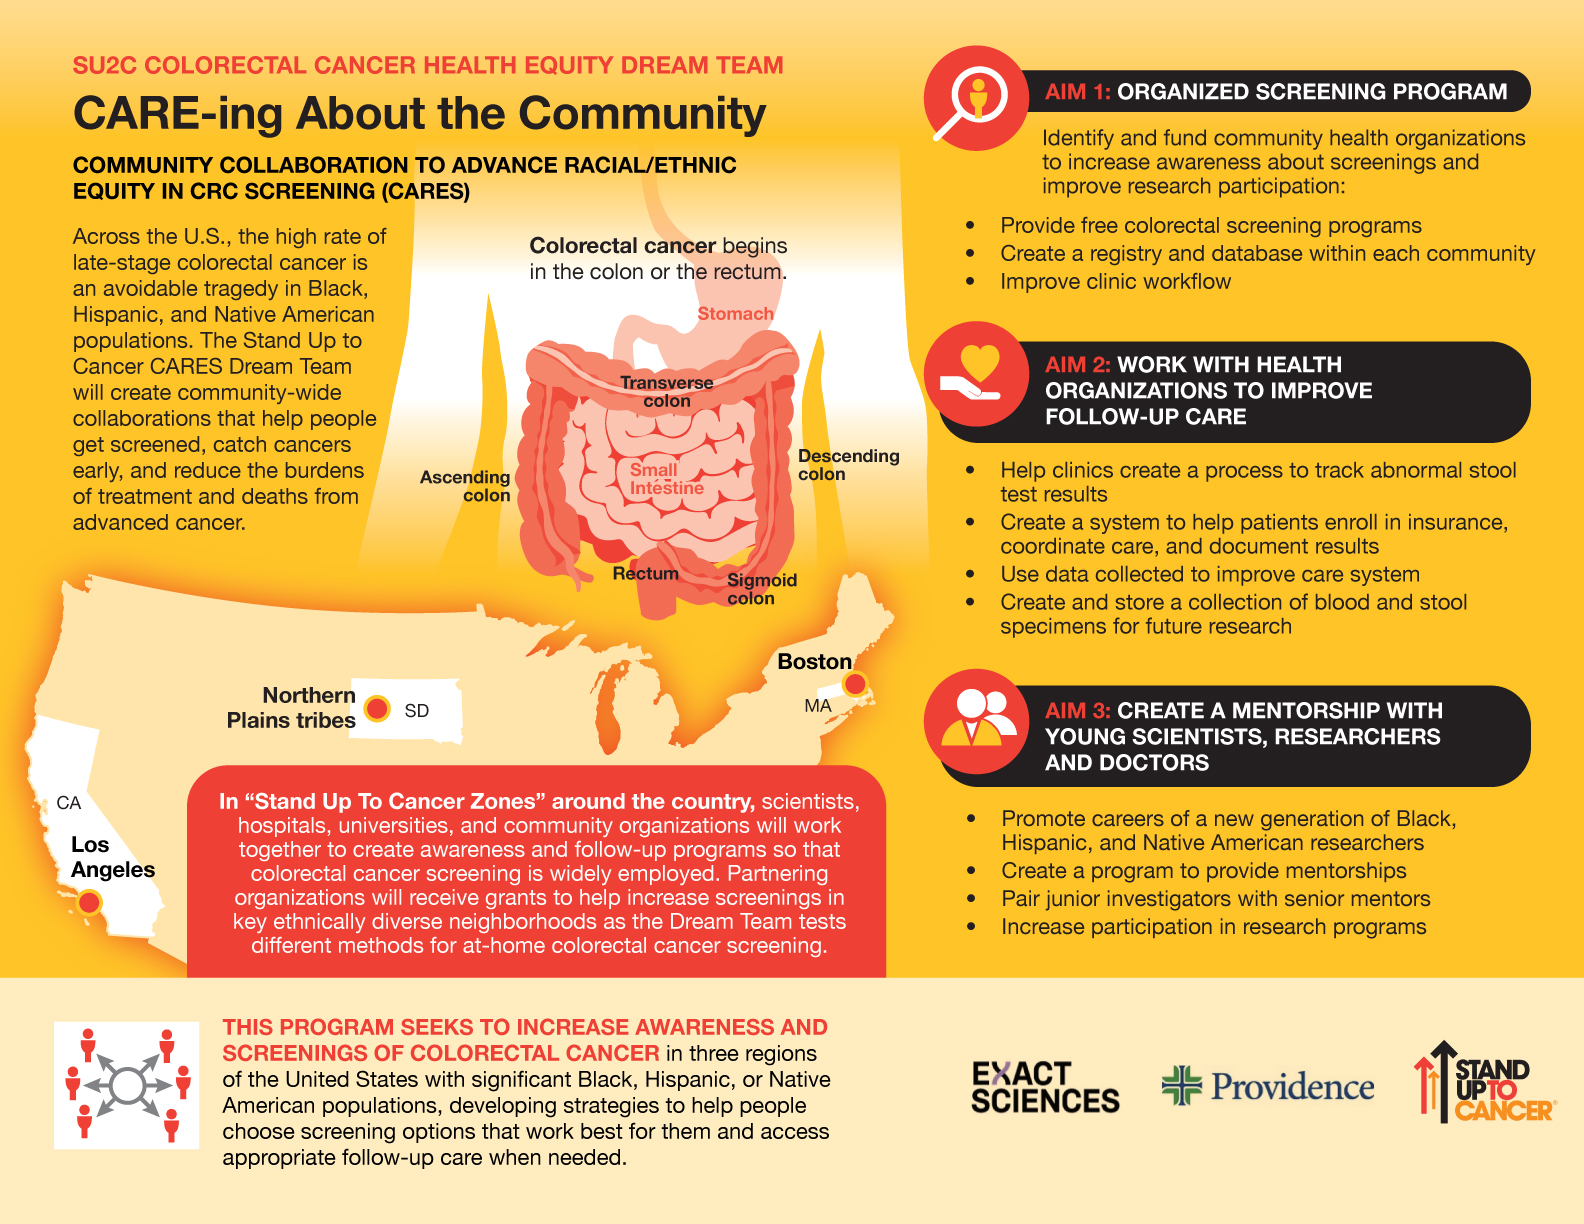 SU2C-Colorectal-Cancer-Screenings-Infographic-FINAL